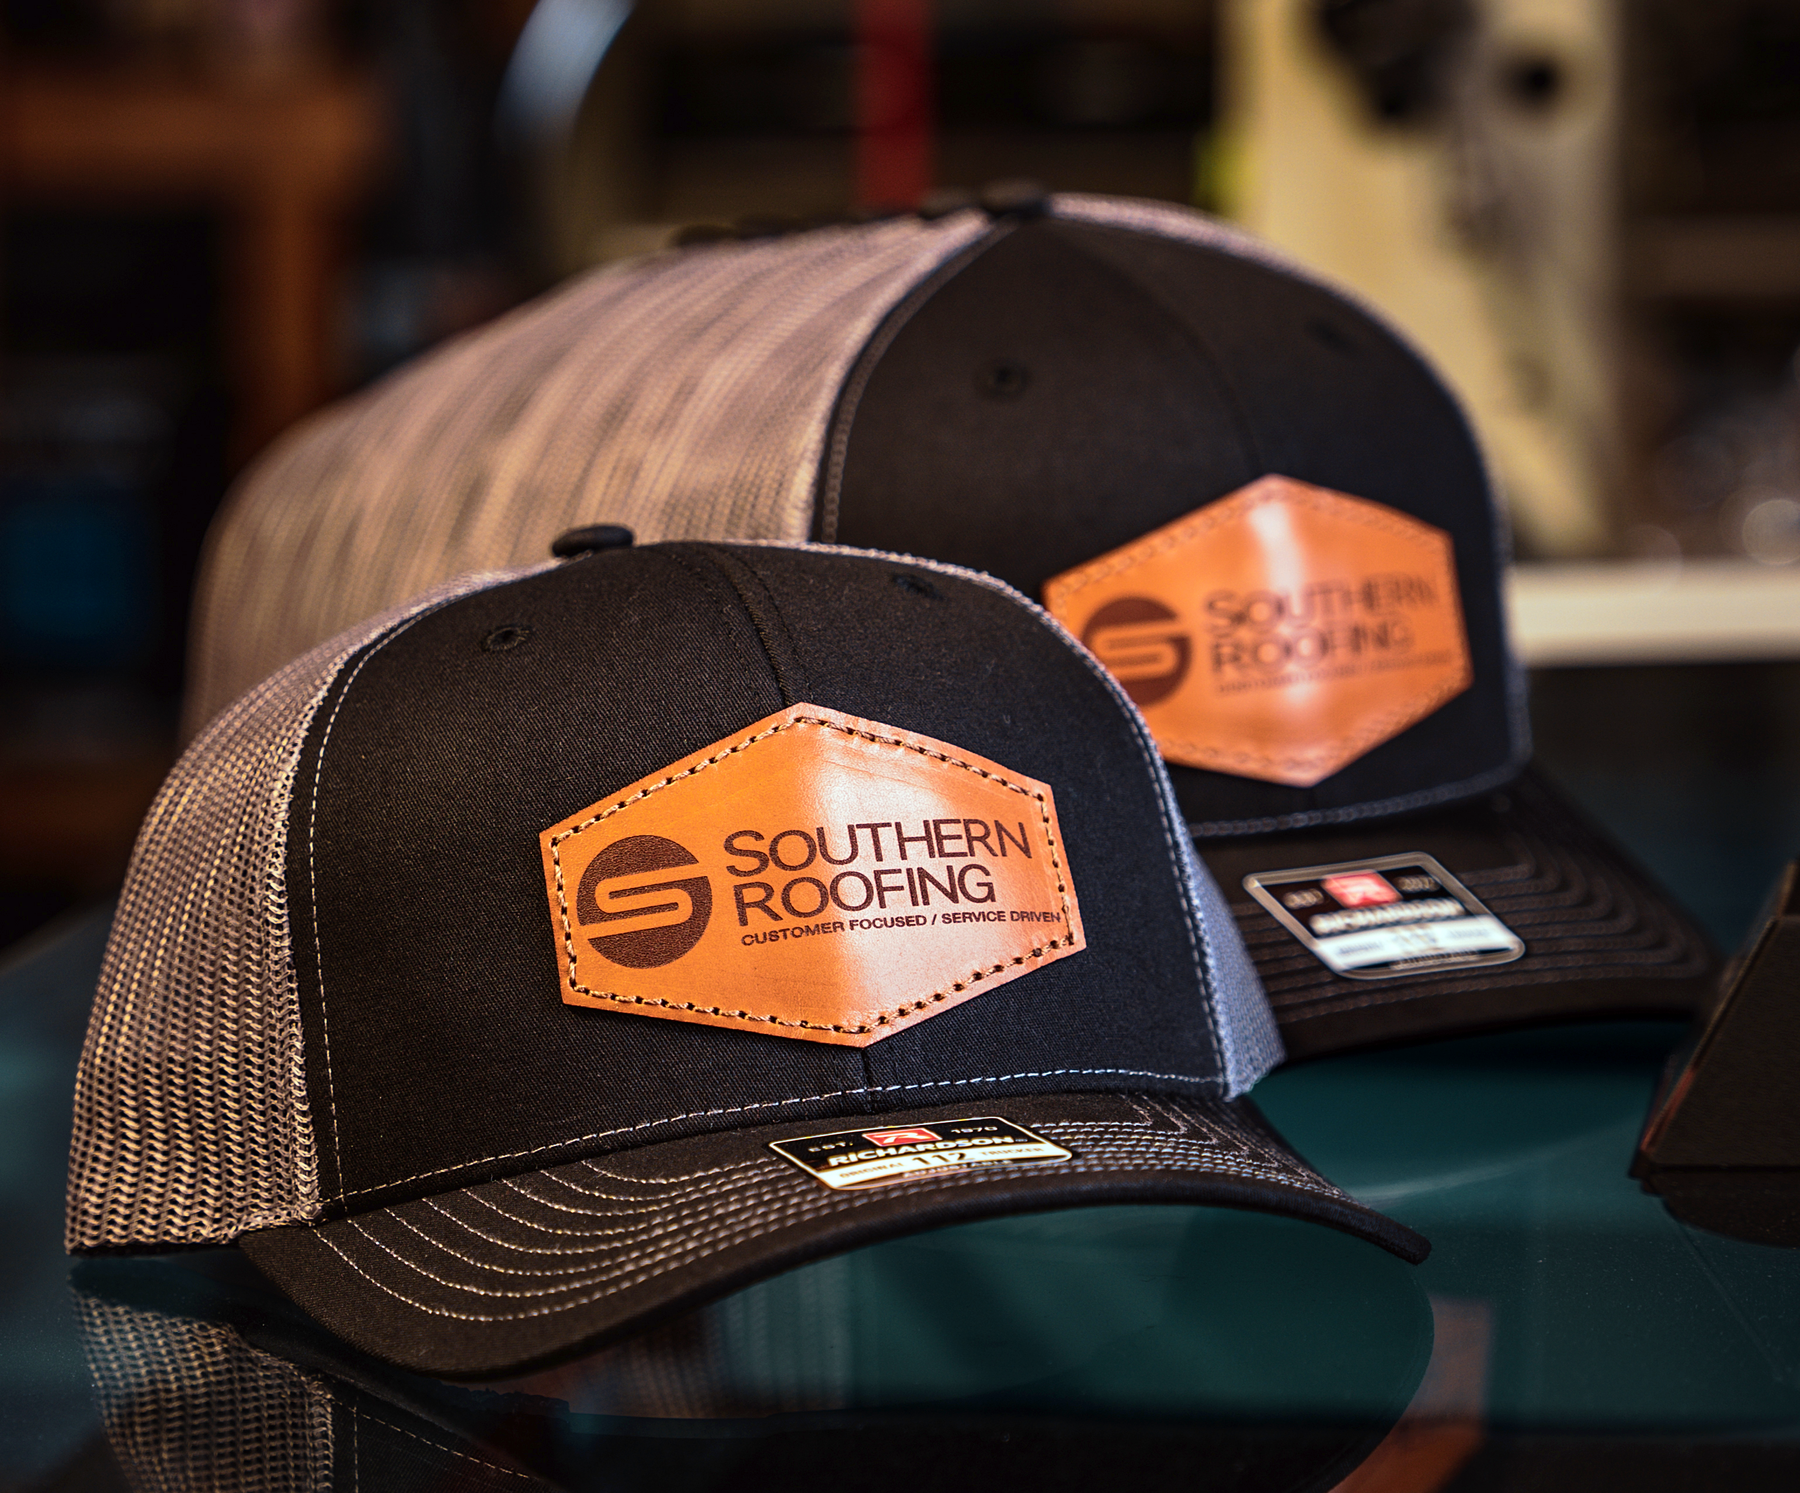 Custom Leather Patch Hats | Richardson 112 | Add Your Logo